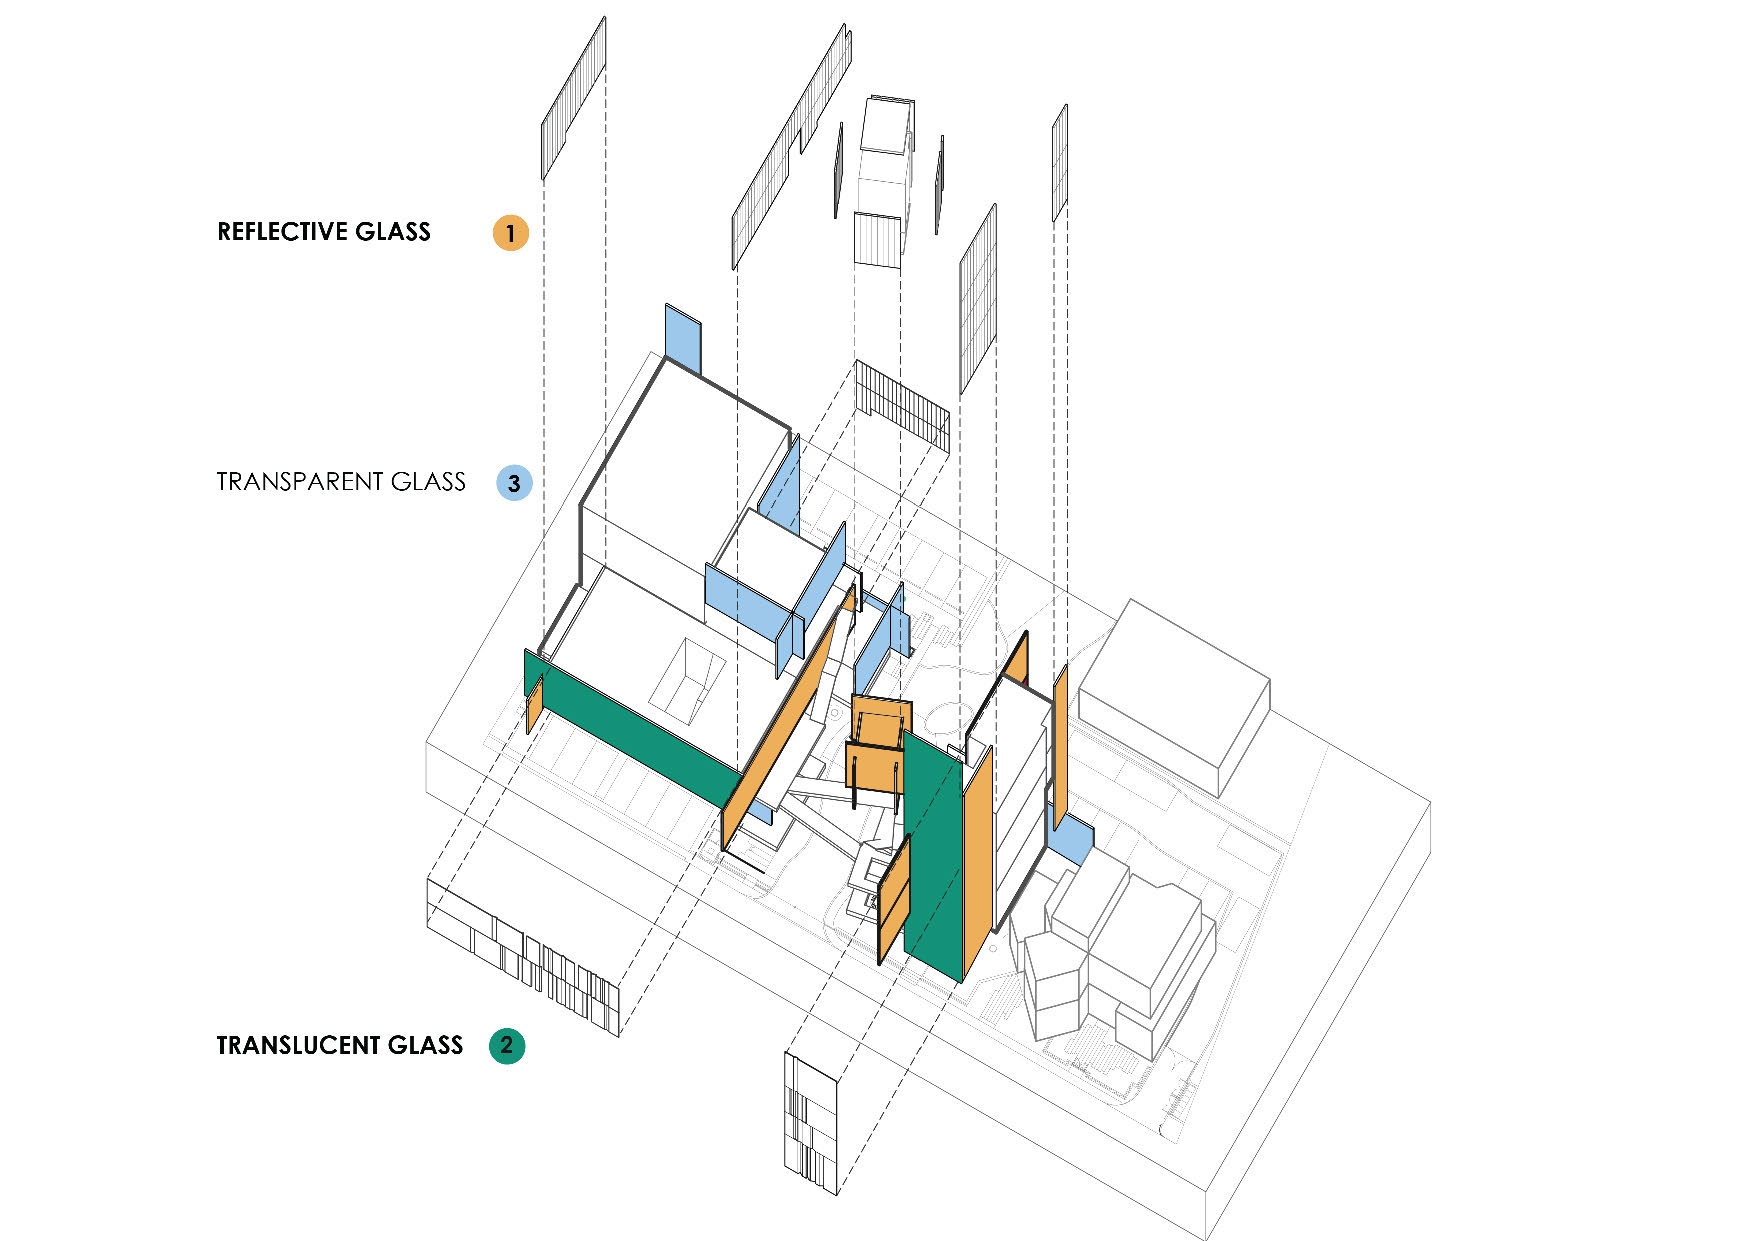 Diagram of the application of three types of glass in the Naiipa Art Complex project